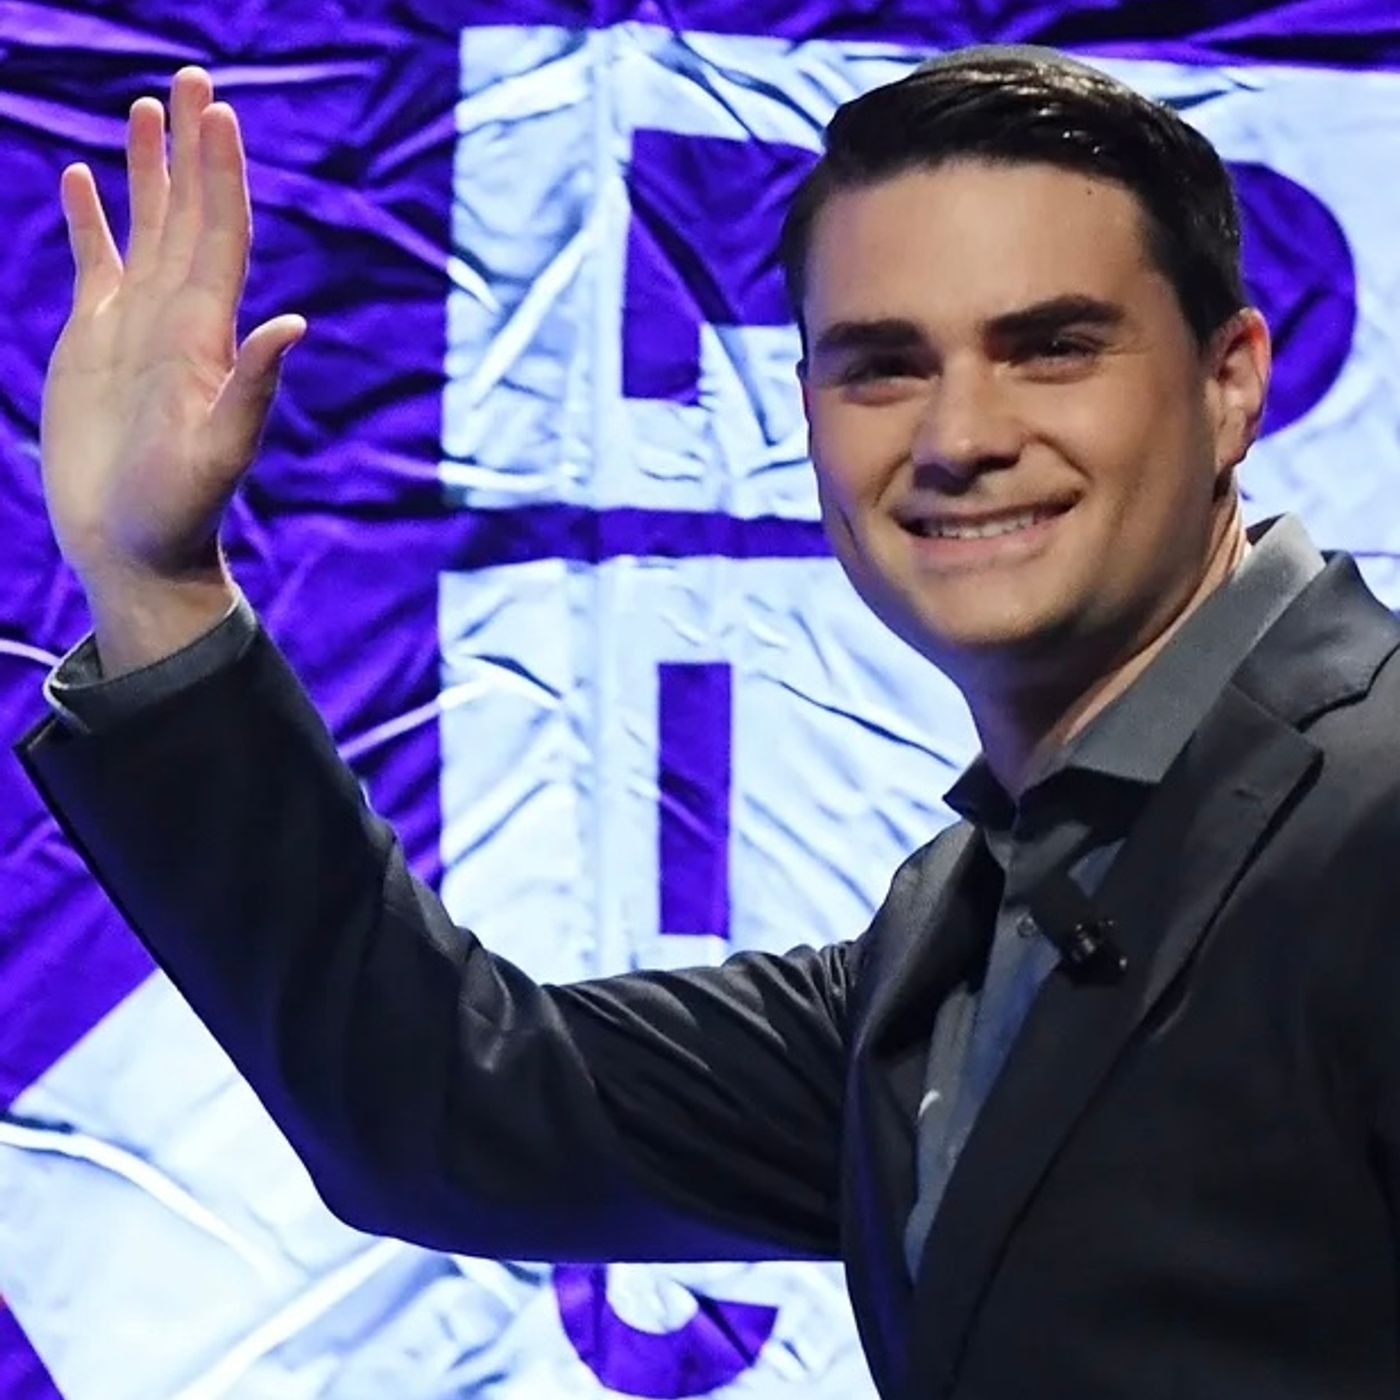 Ben Shapiro breathing offends Podcast Movement Image